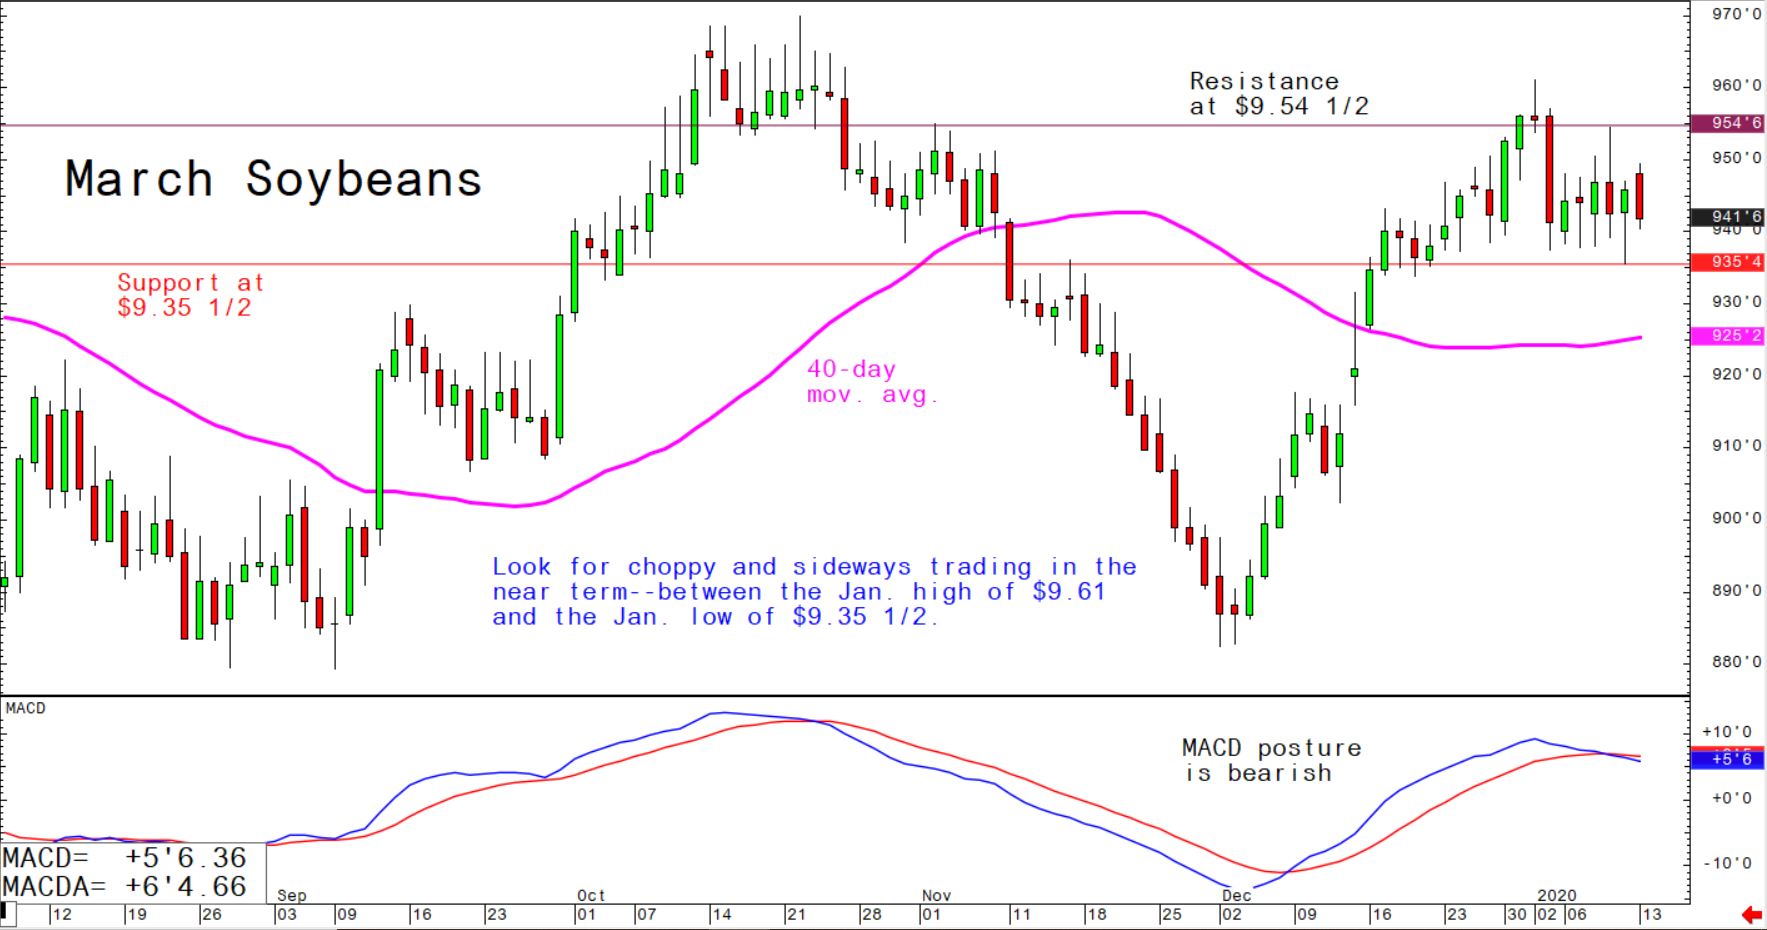 Look for choppy and sideways trading in the near term between the January high of $9.61 and the January low of $9.35 1/2